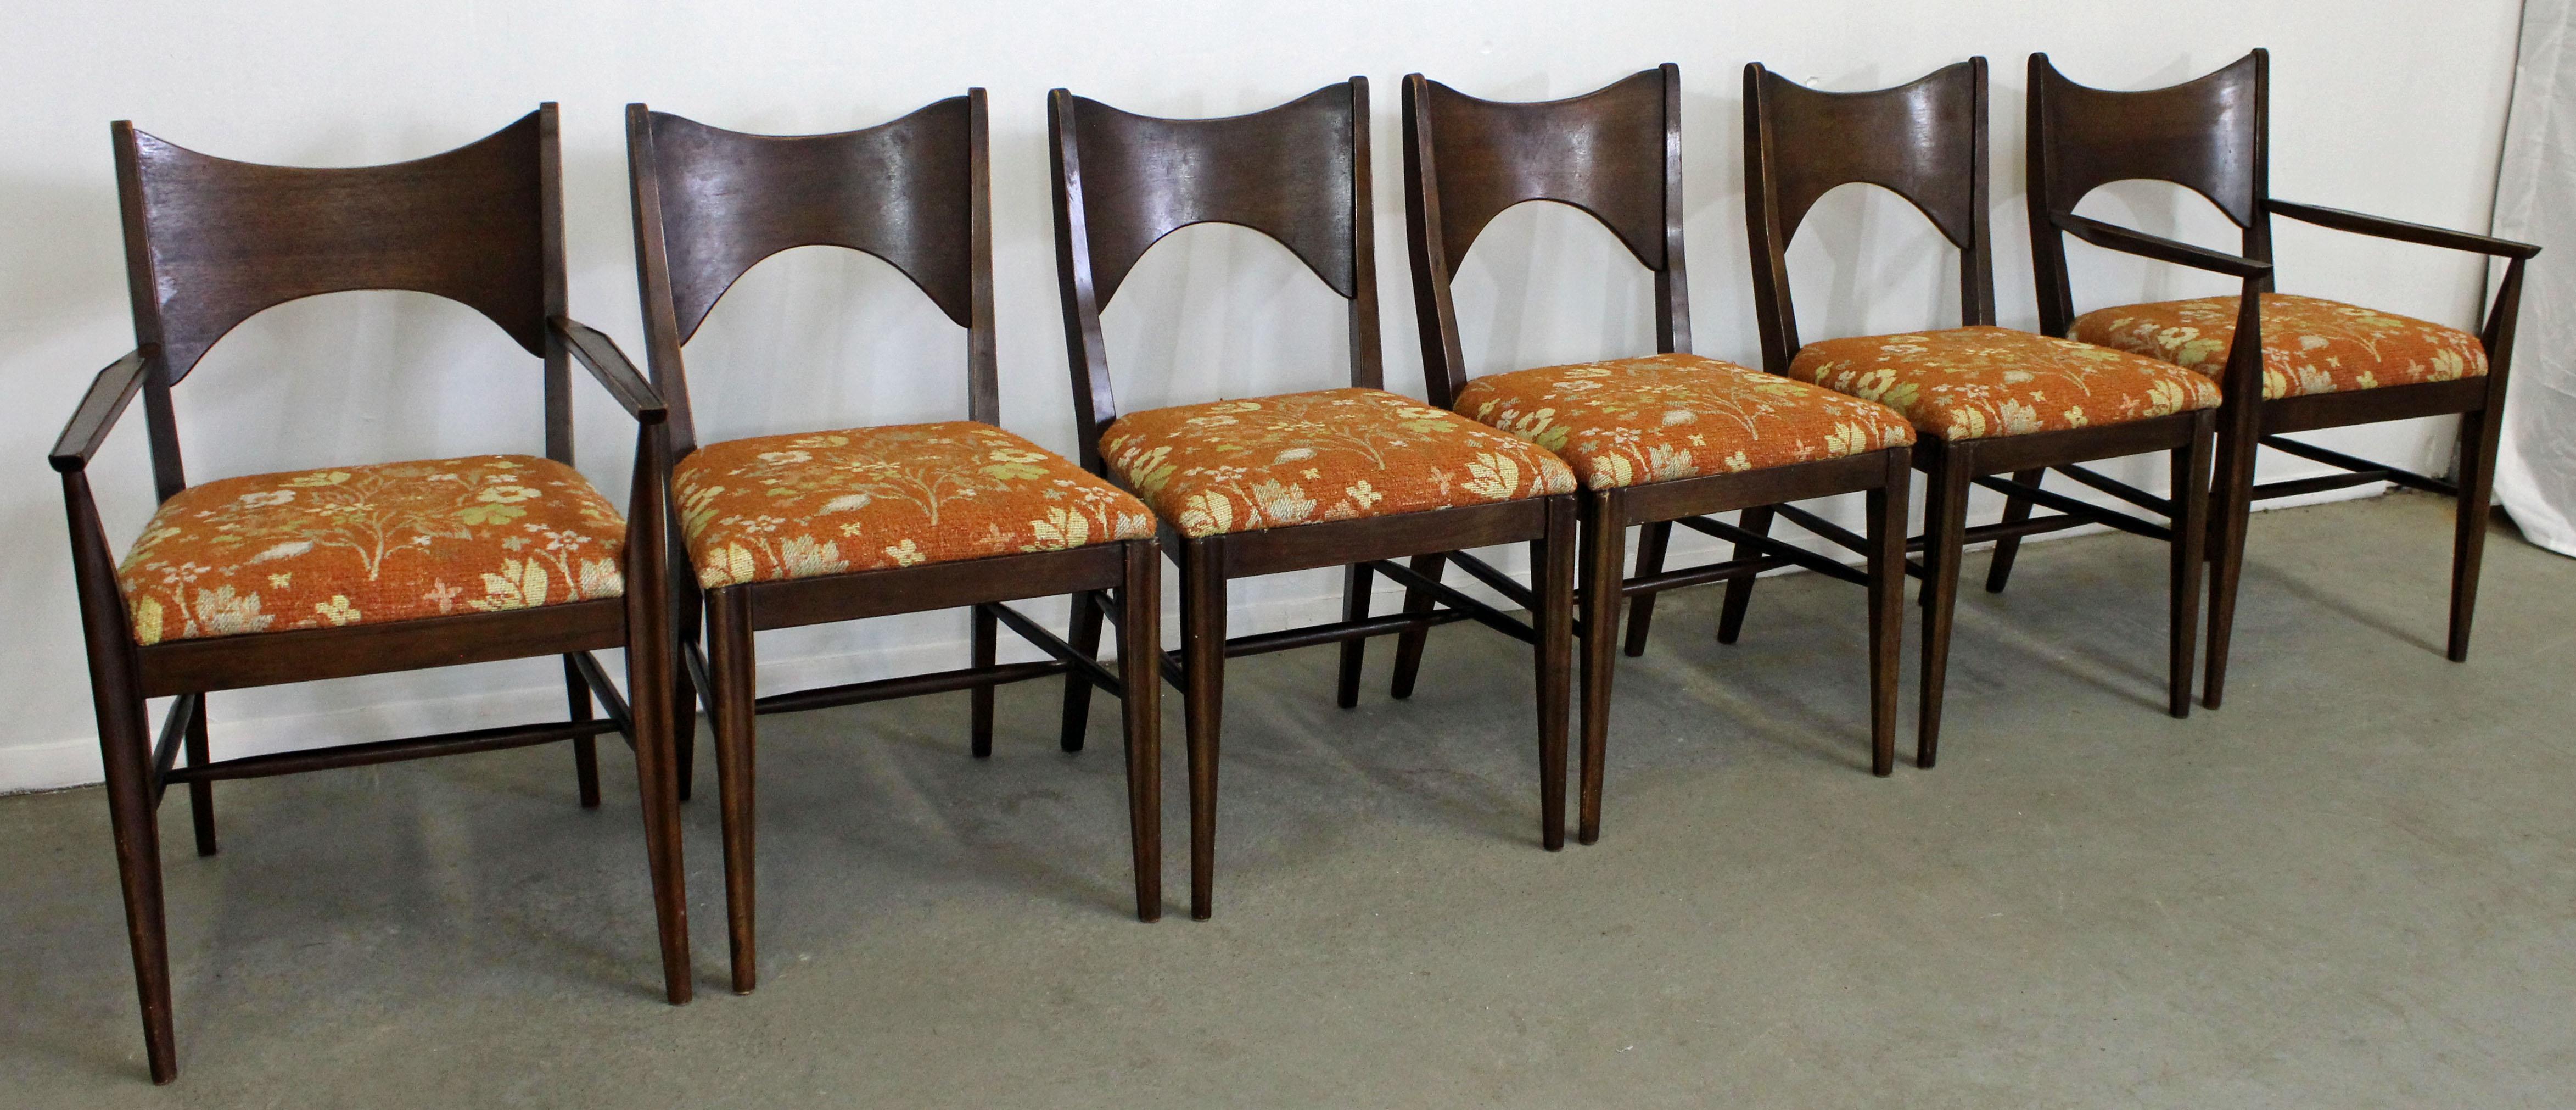 What a find. Offered is a set of 6 walnut dining chairs, including four side chairs and two armchairs. We believe they are made in the style of Paul McCobb by Broyhill, due to the tapering of arms and legs, but they aren't signed. They are good